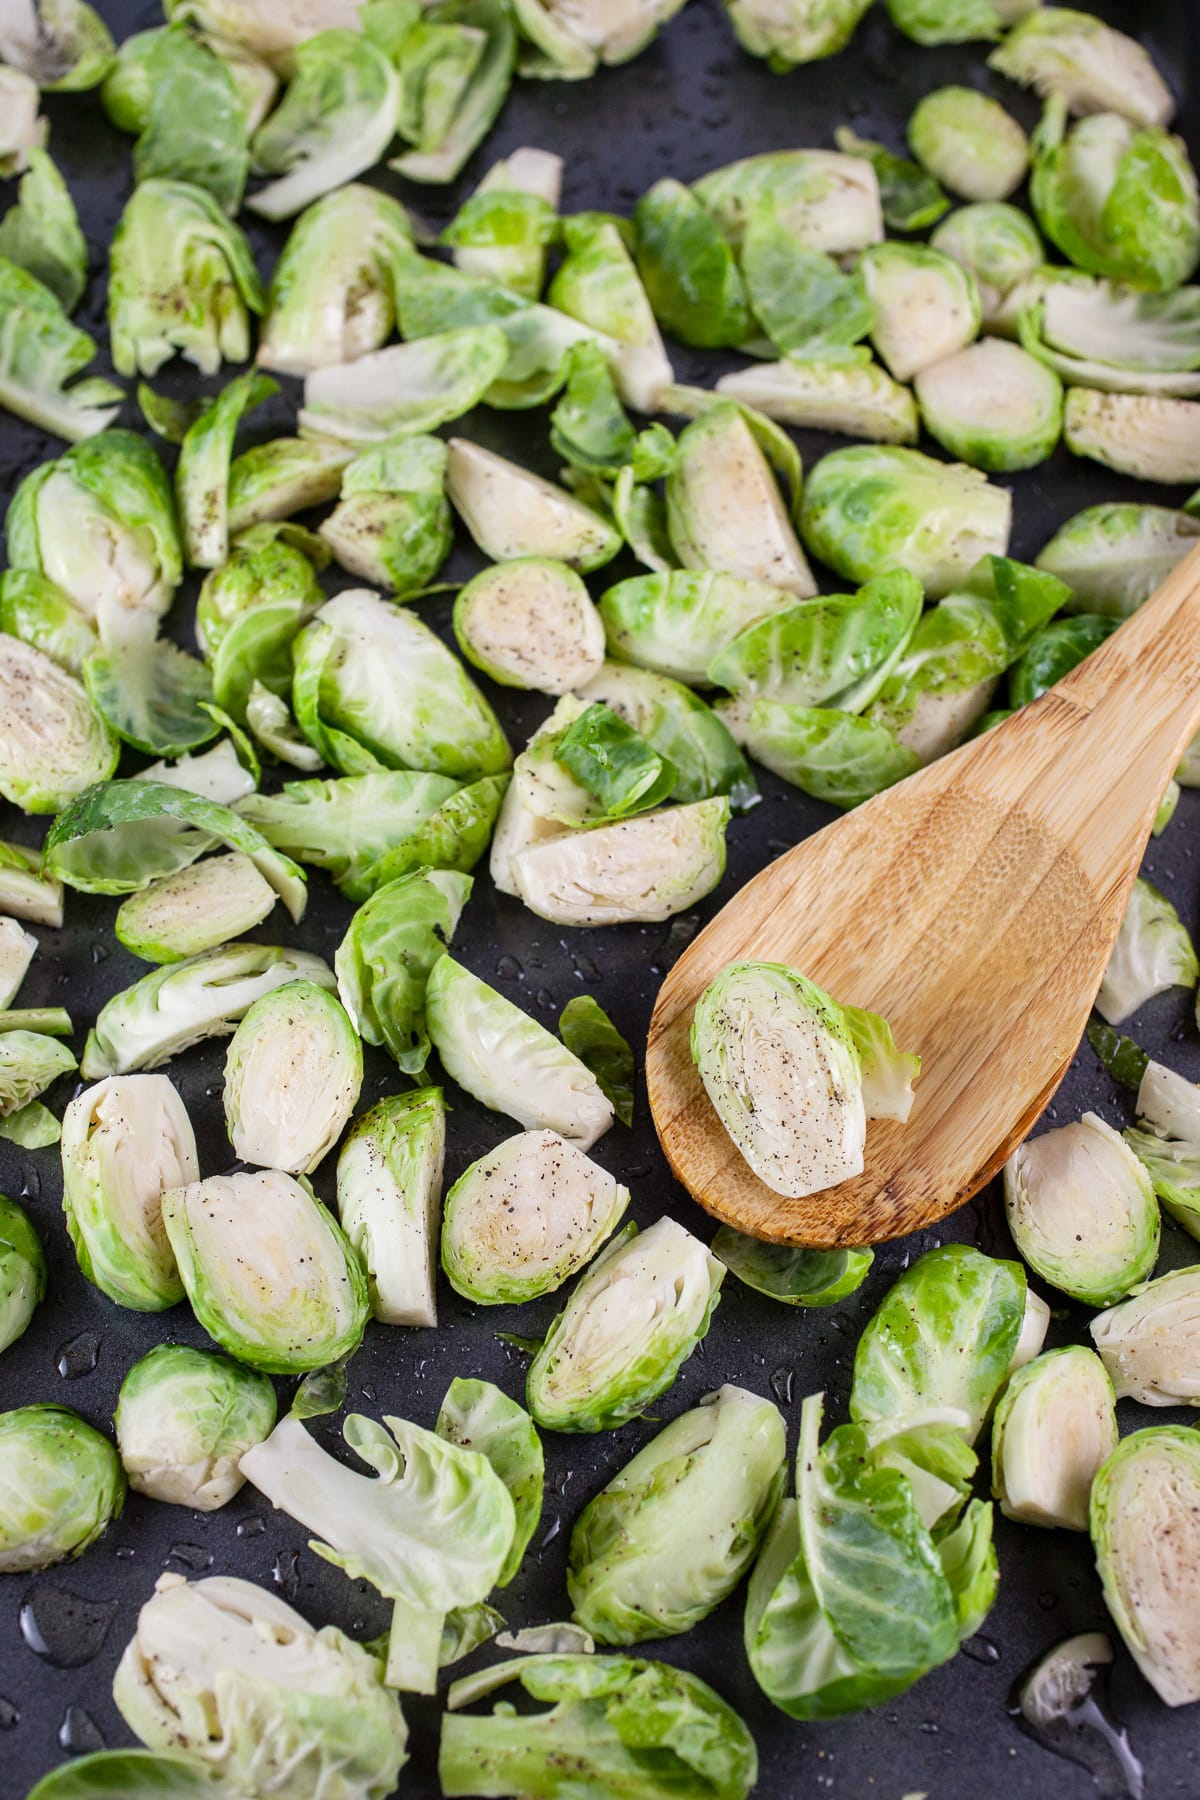 Uncooked chopped Brussels sprouts on baking sheet with wooden spoon.